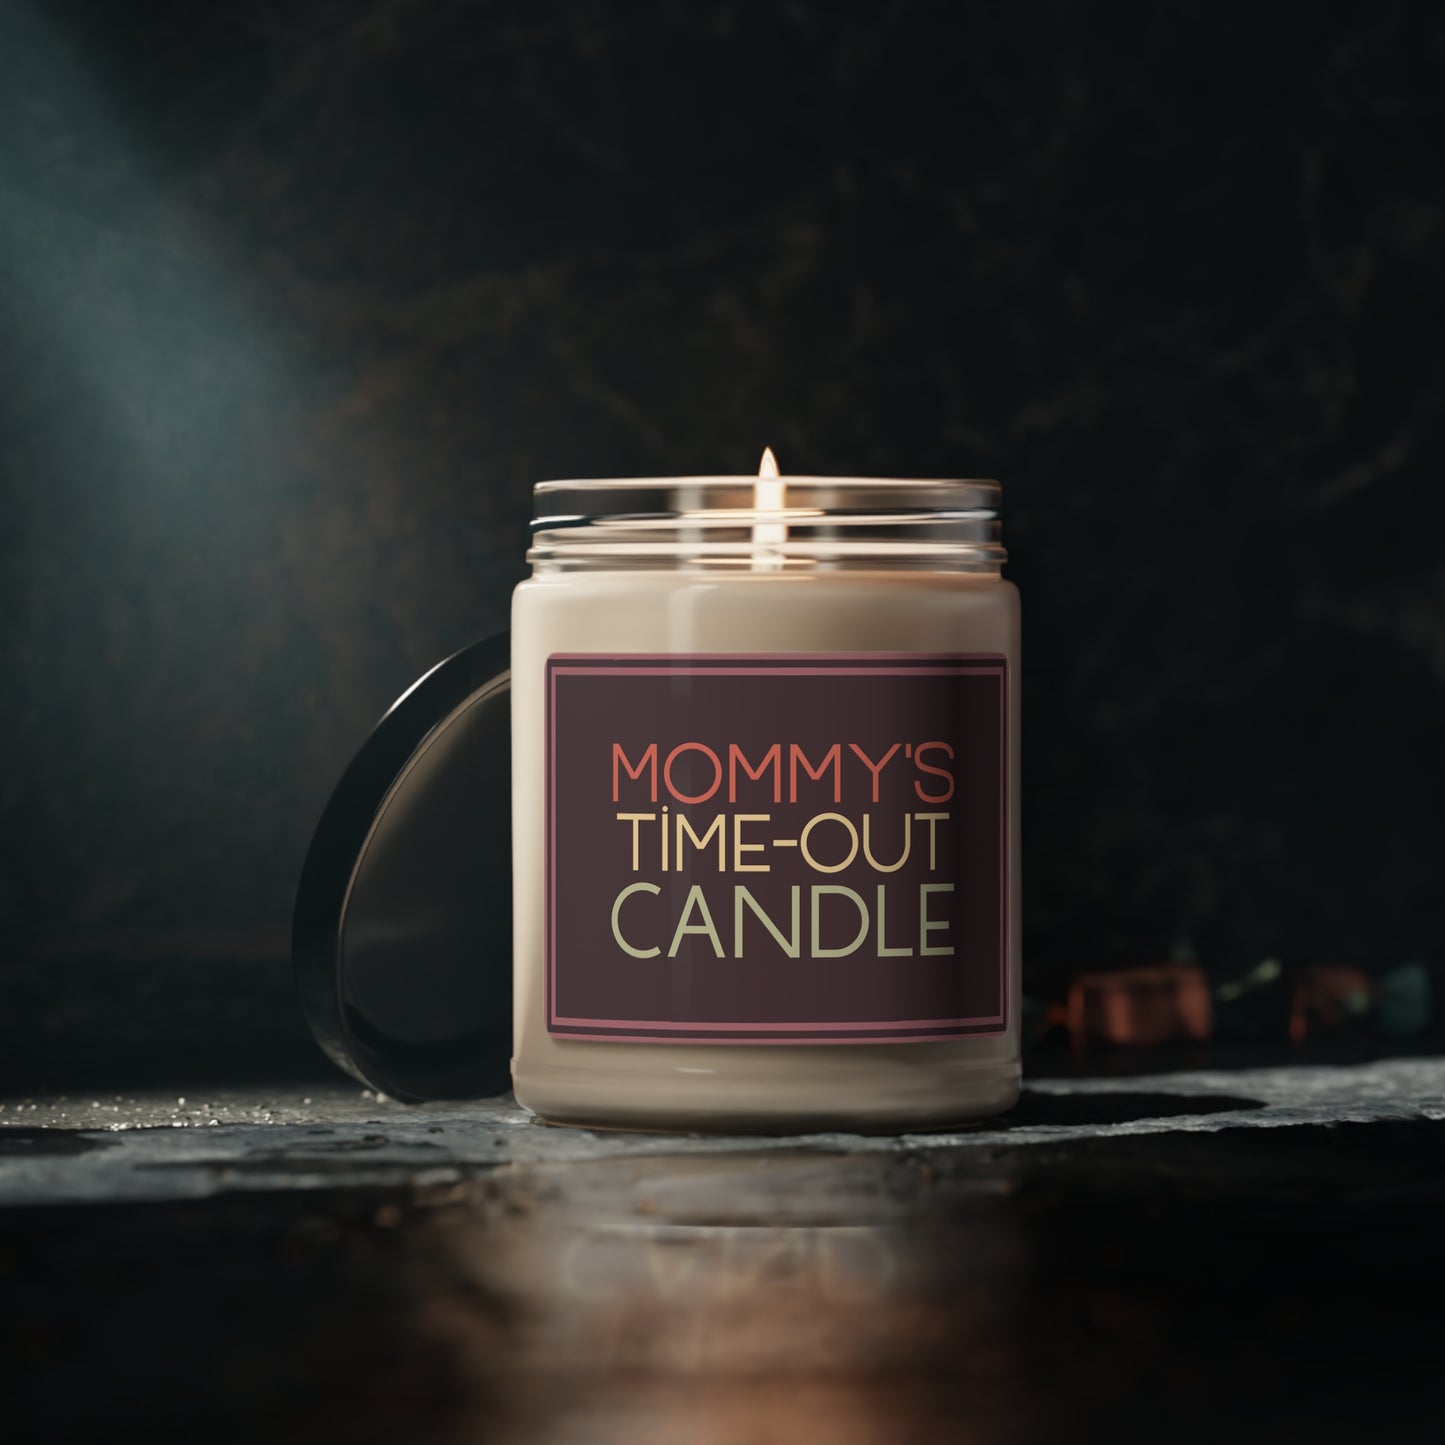 "Mommy's Time Out Candle" Scented Soy Candle, 9oz